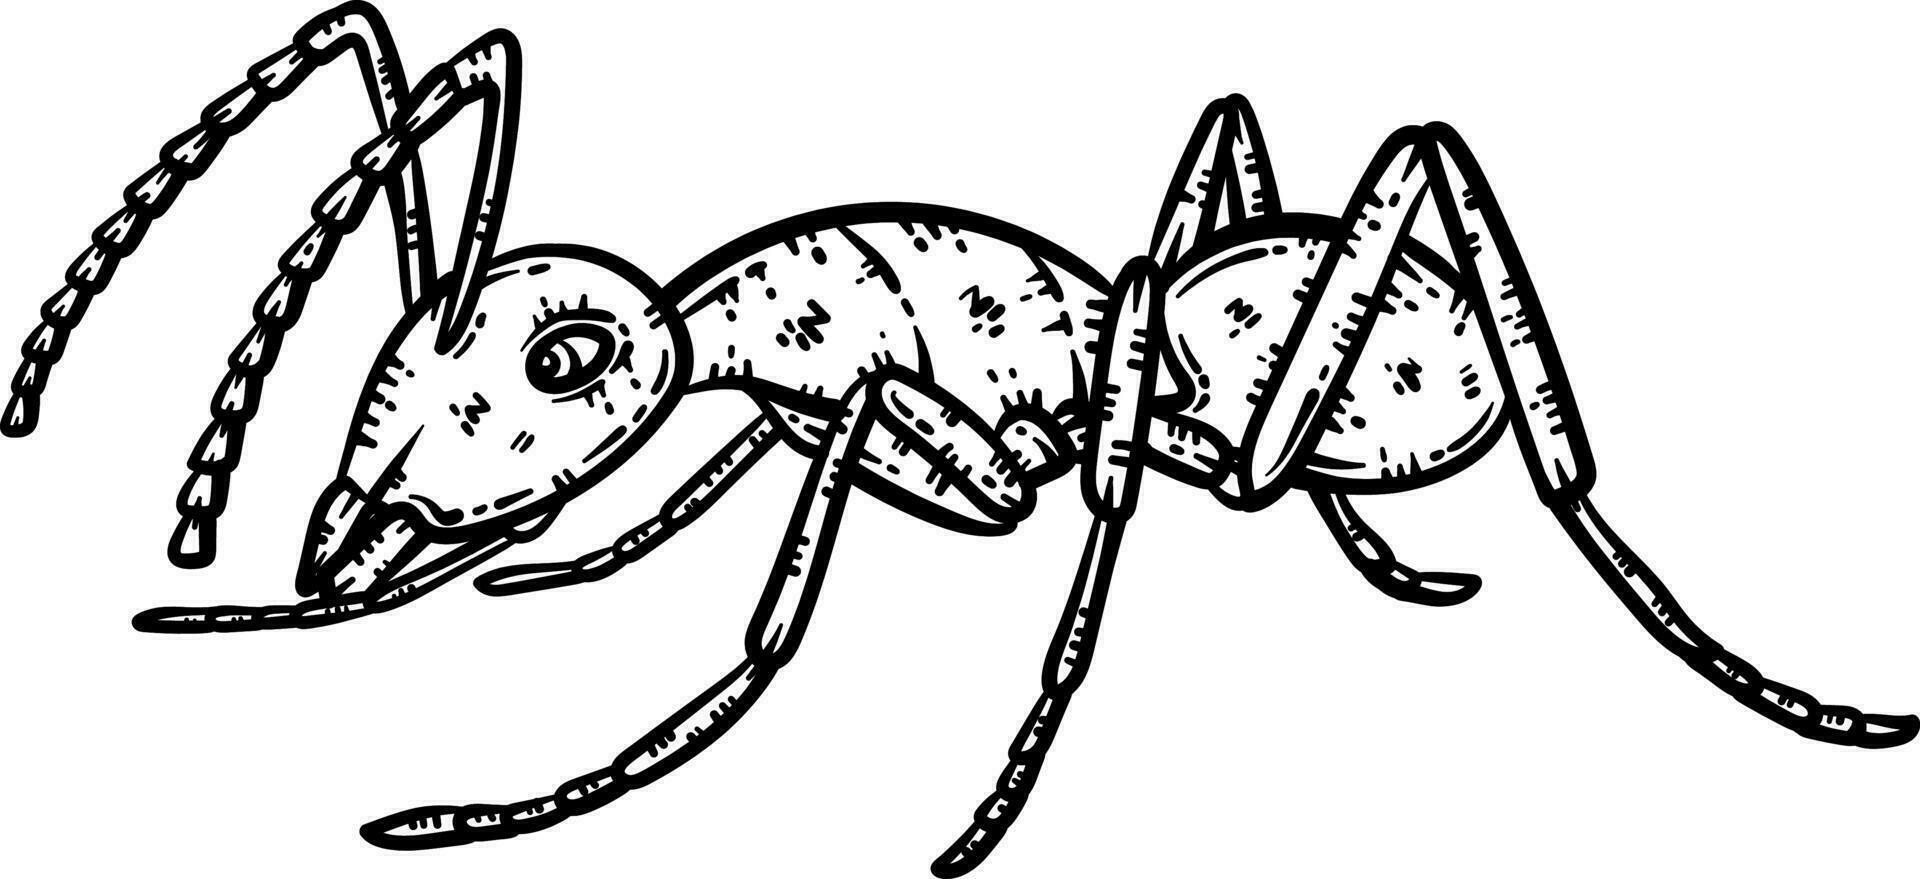 Ant Animal Coloring Page for Adults vector